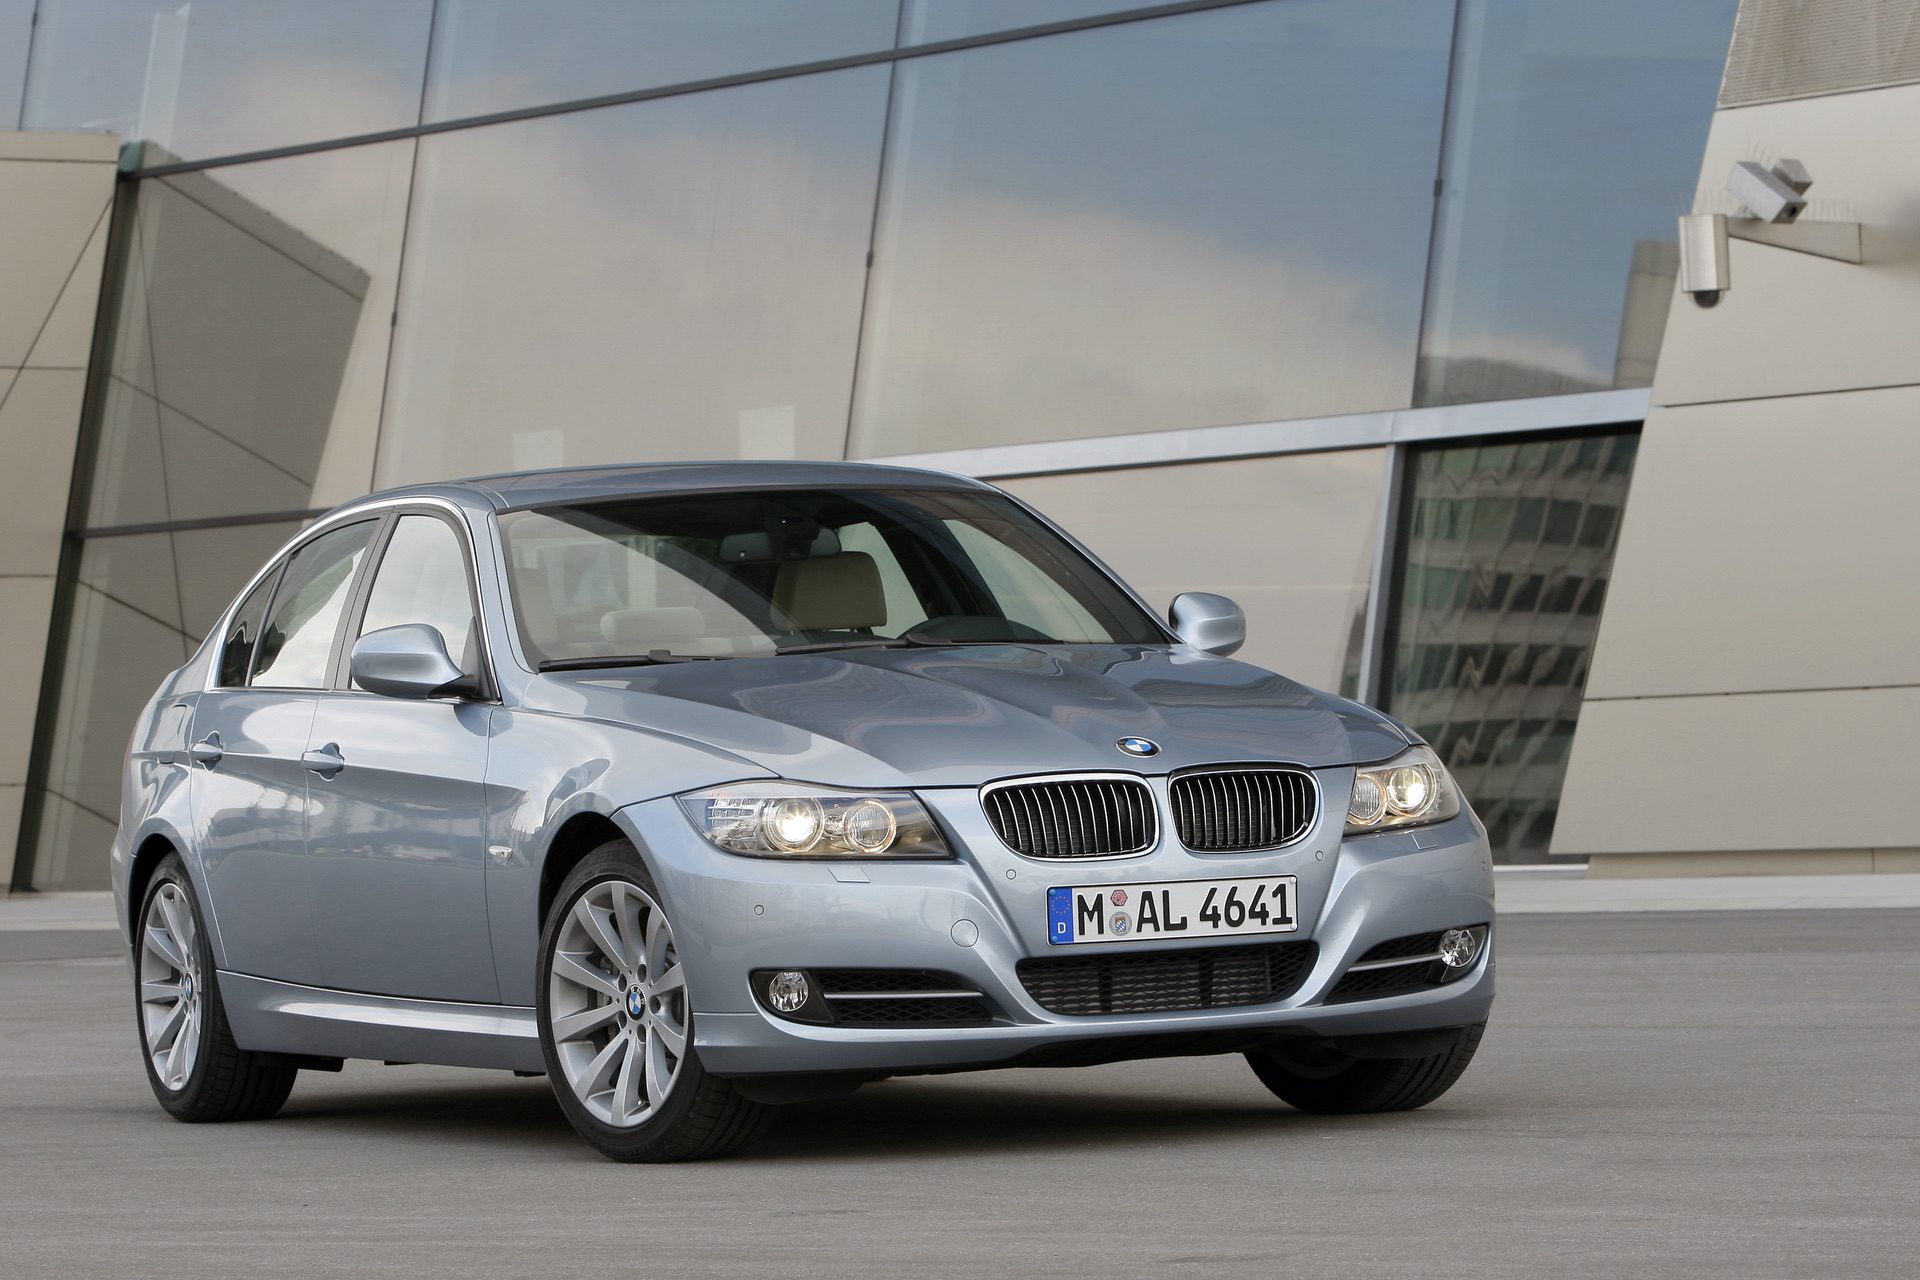 The Most Reliable E90 BMW Models Still Have Some Engine Issues